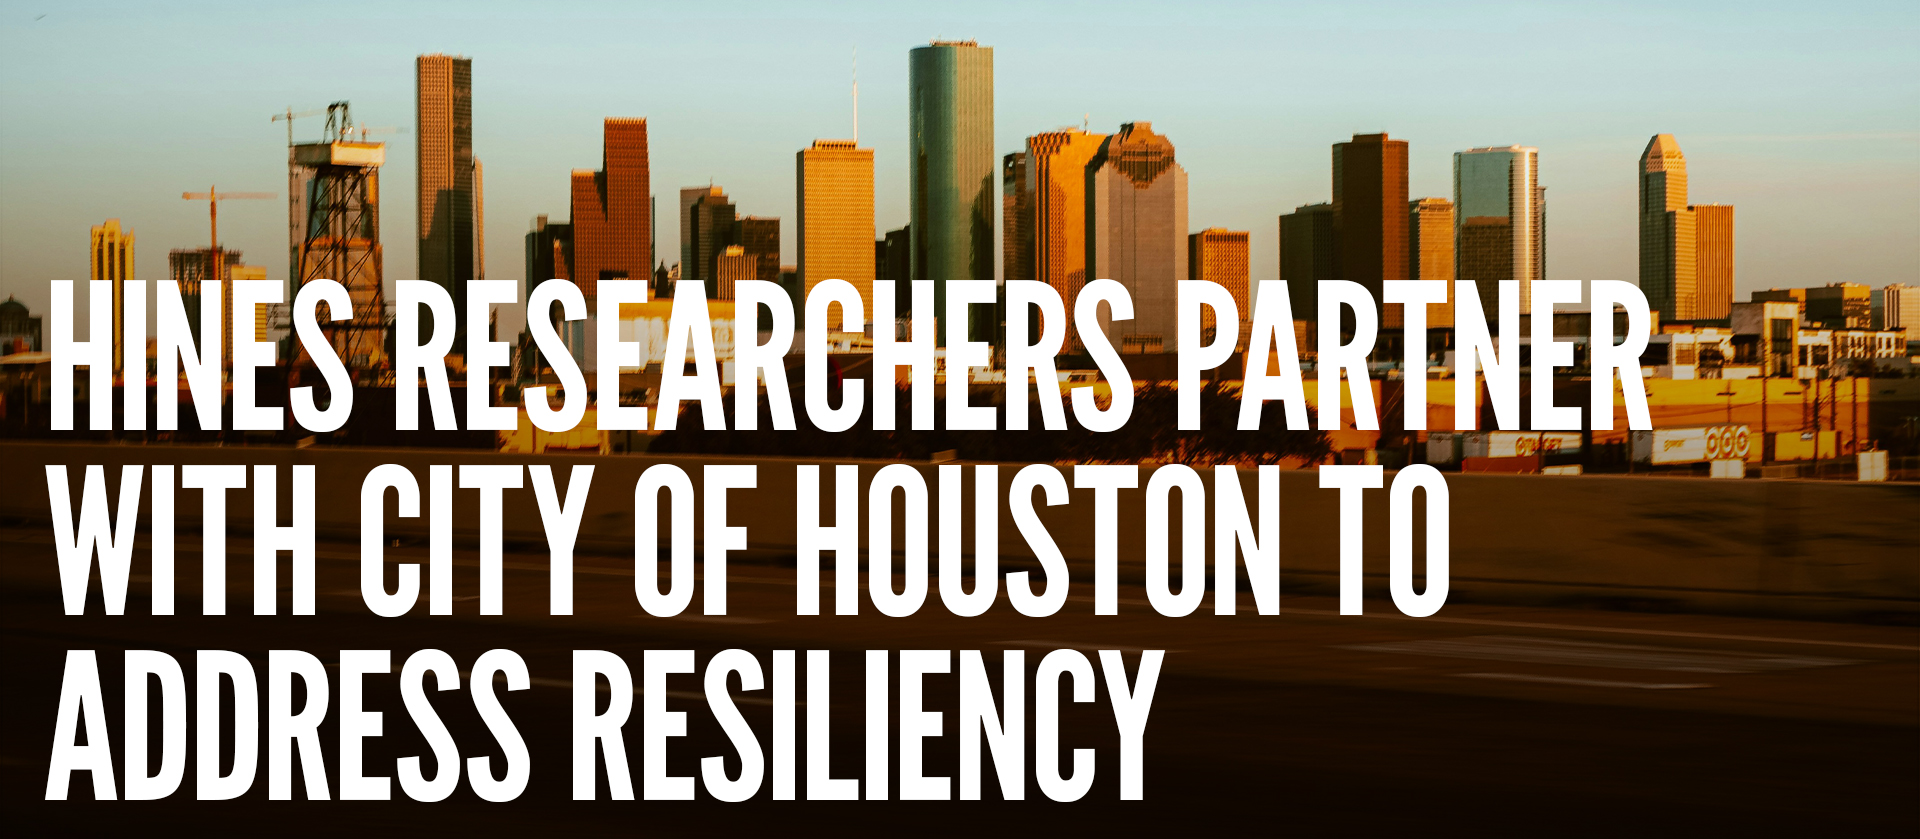 Hines Researchers Partner with City of Houston to Address Resiliency